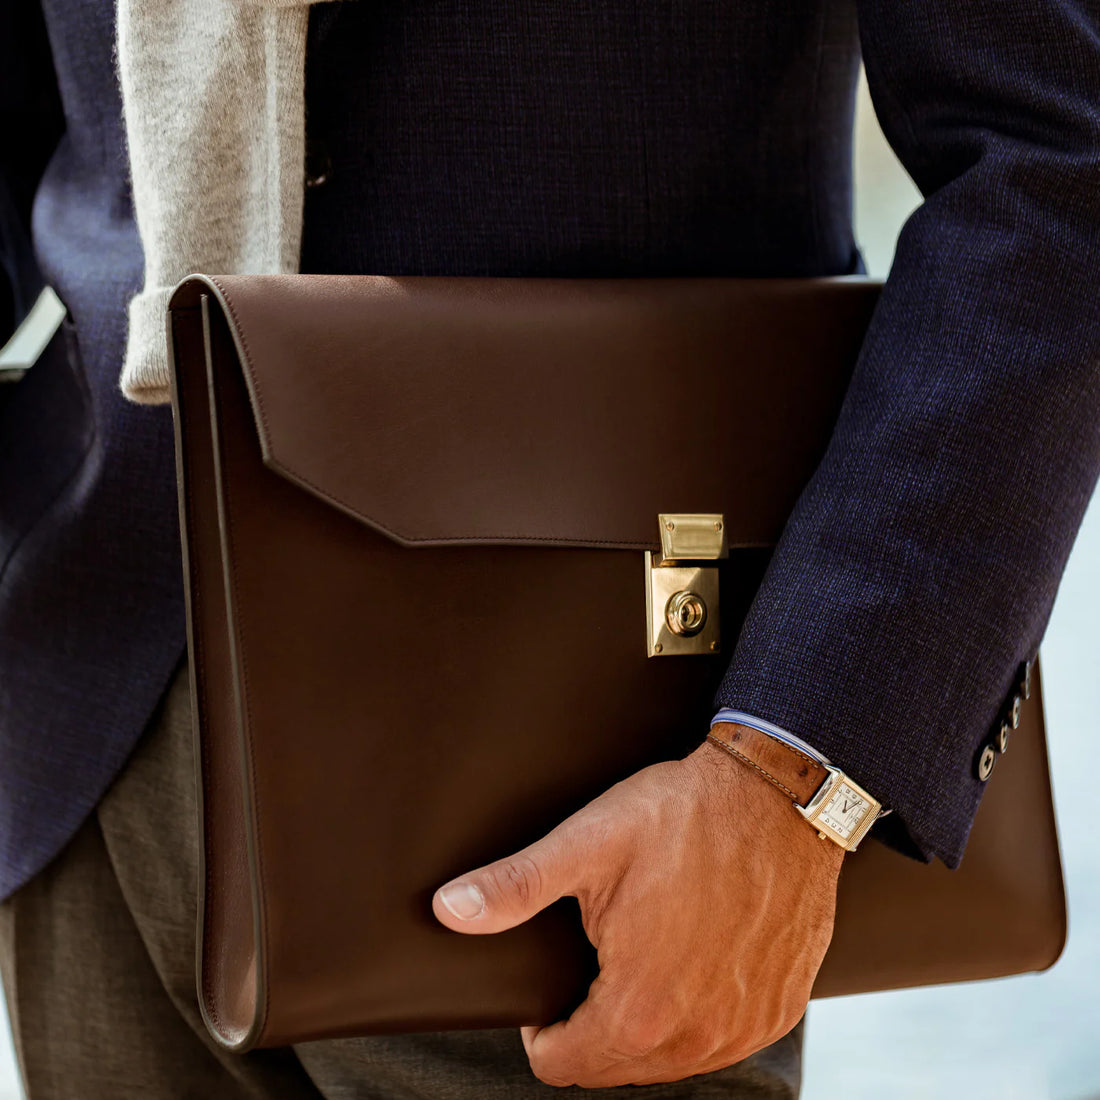 A person clad in a business suit carrying a brown leather briefcase.